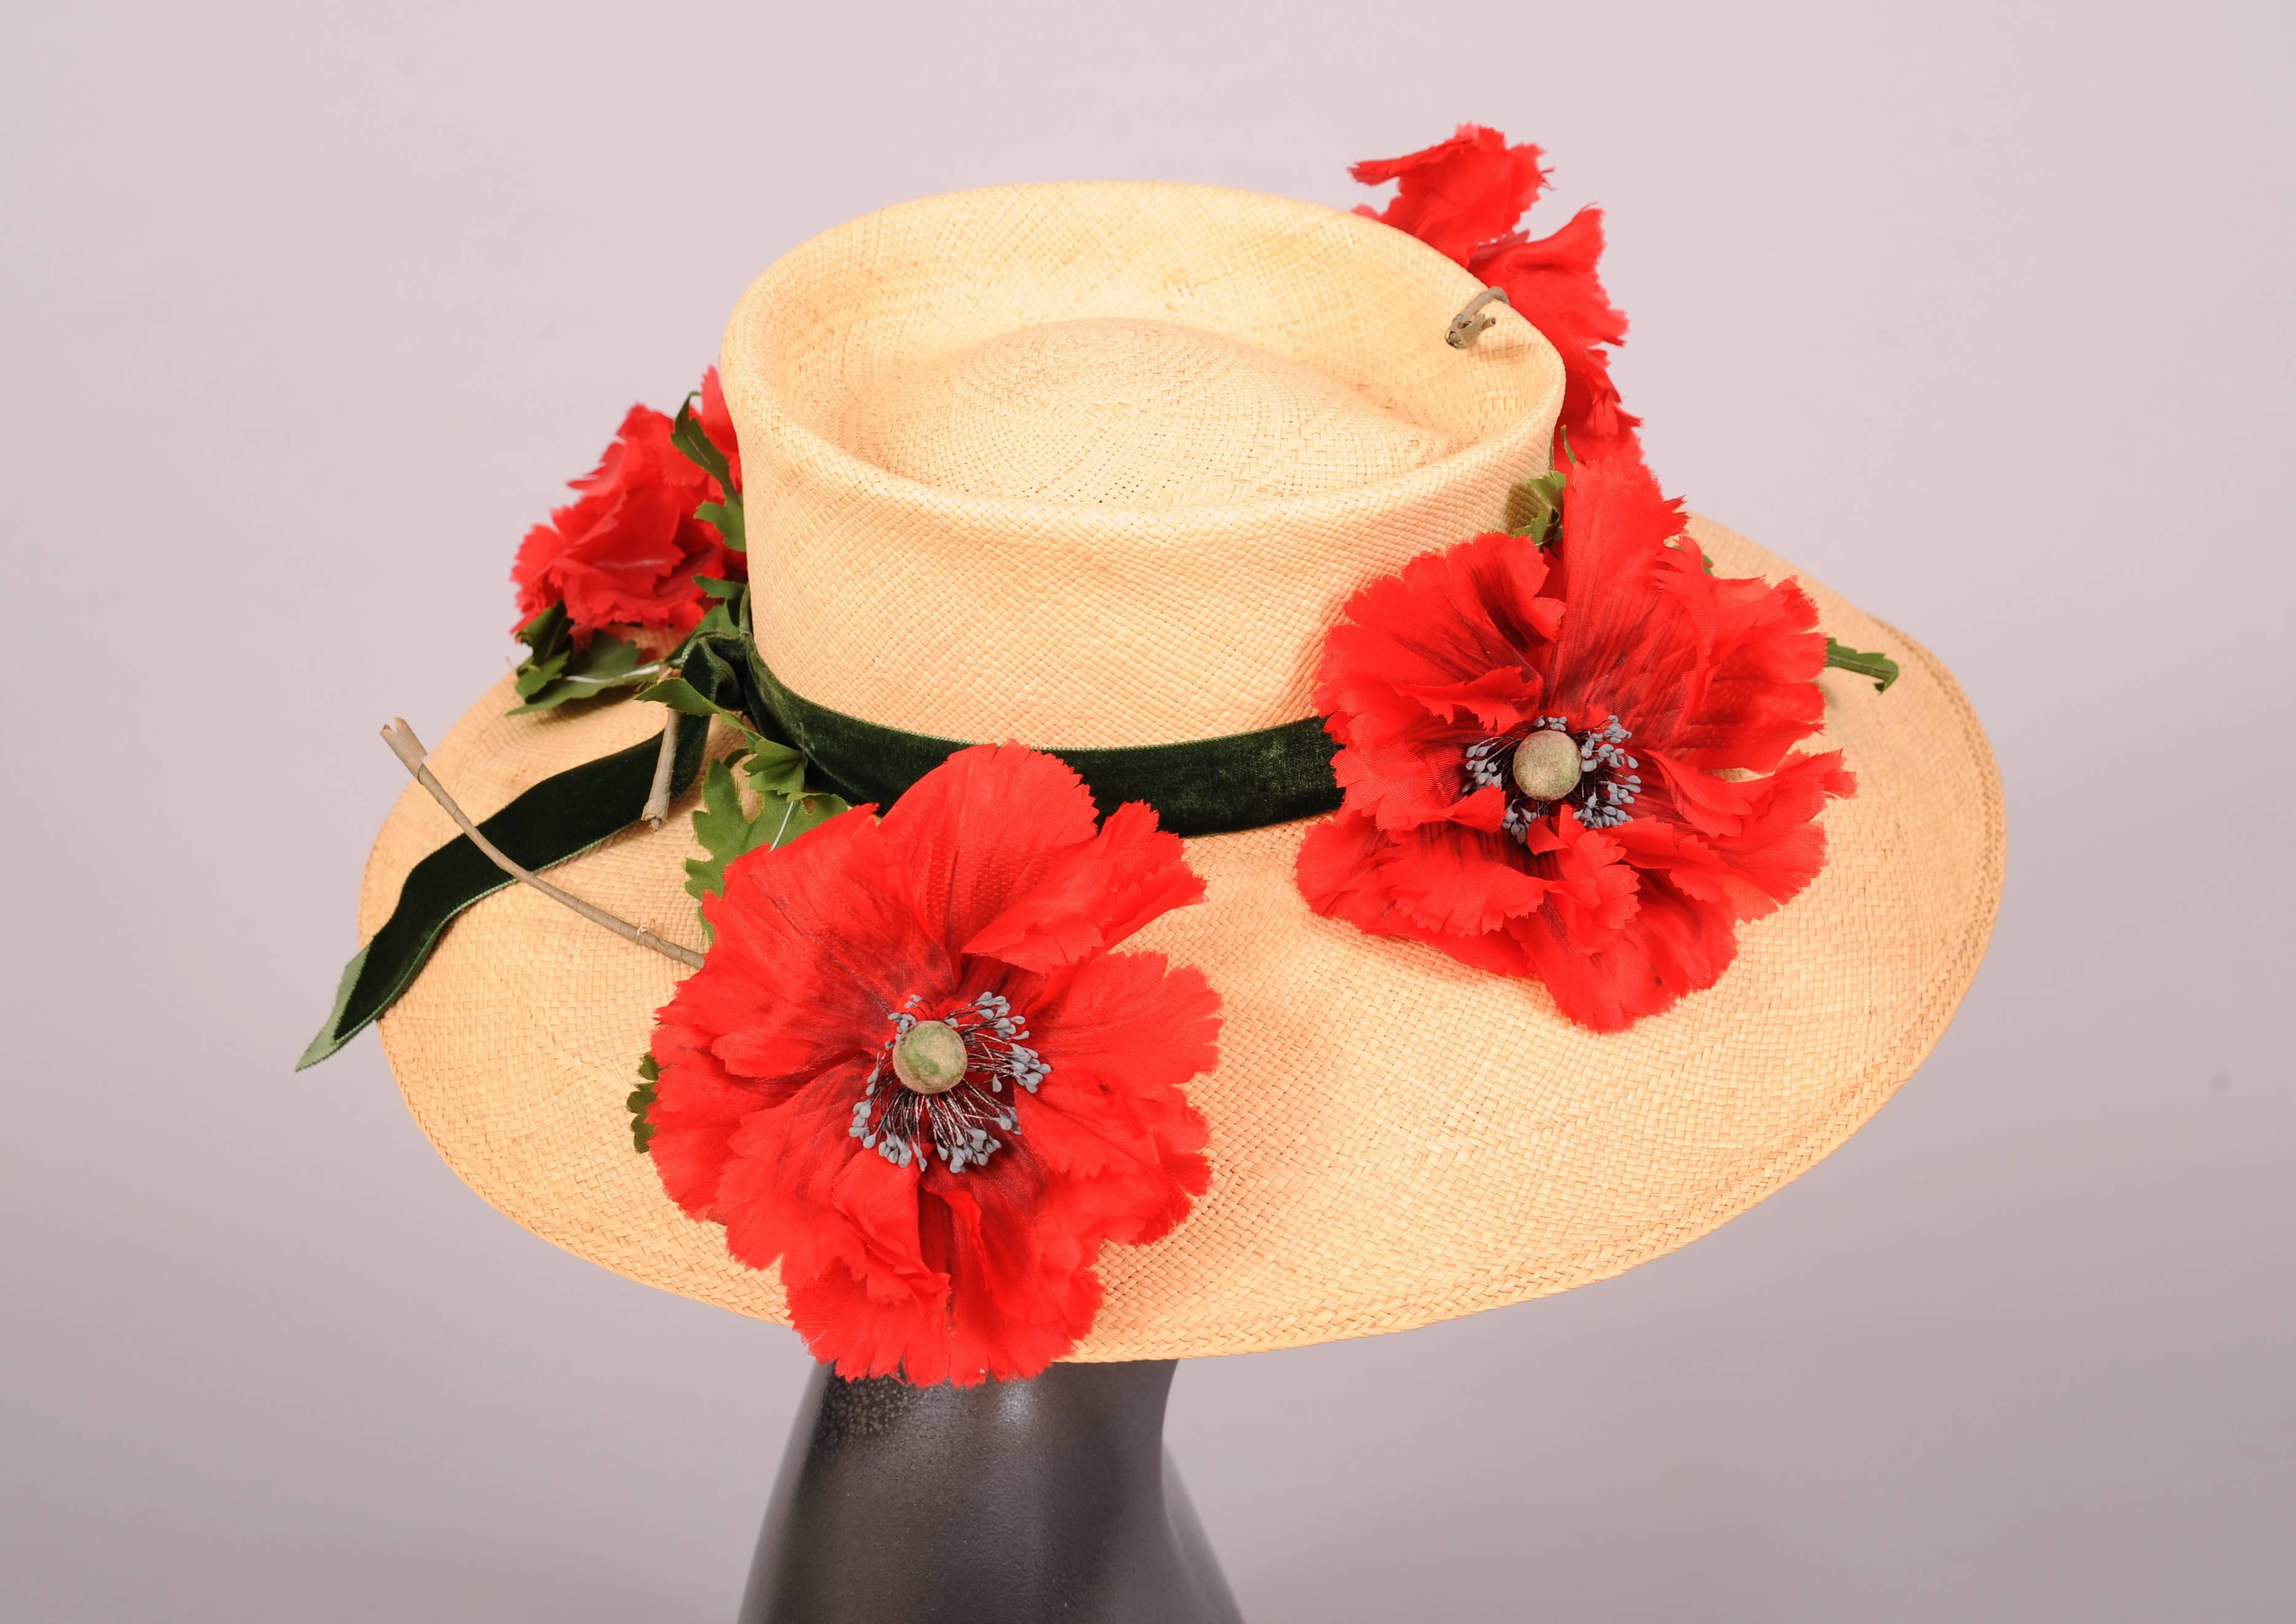 A finely woven natural straw hat with a wide brim is trimmed with a green velvet ribbon and luscious red silk poppies. They are scattered around the brim in a random pattern and they are accented with green leaves. The hat is in excellent